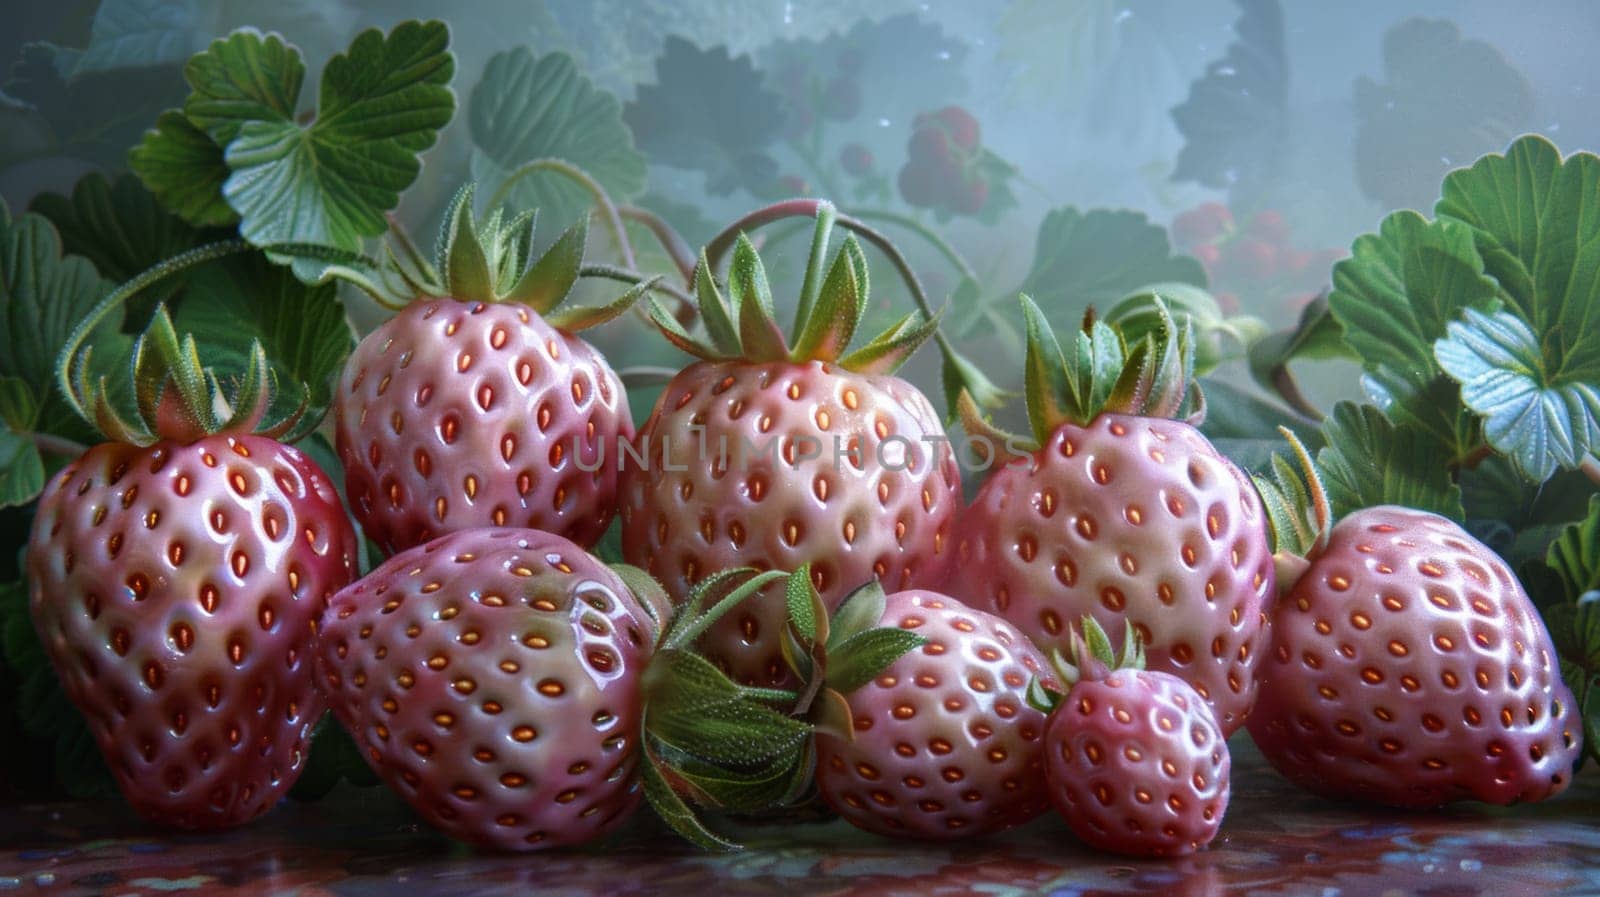 A group of strawberries are sitting on a table with leaves